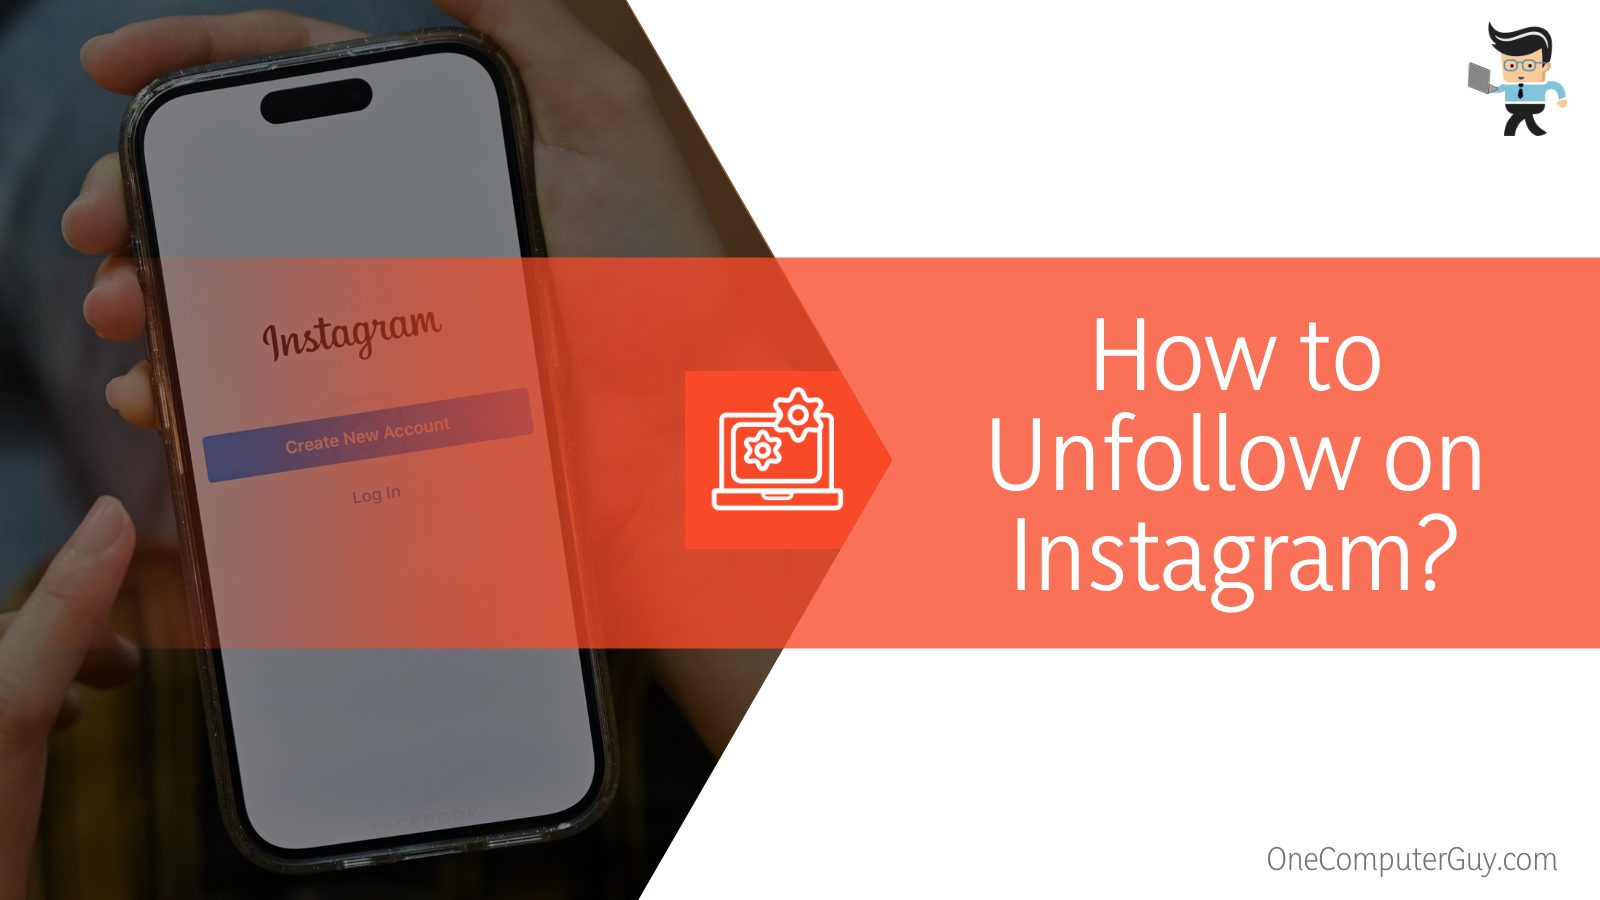 How to Unfollow on Instagram